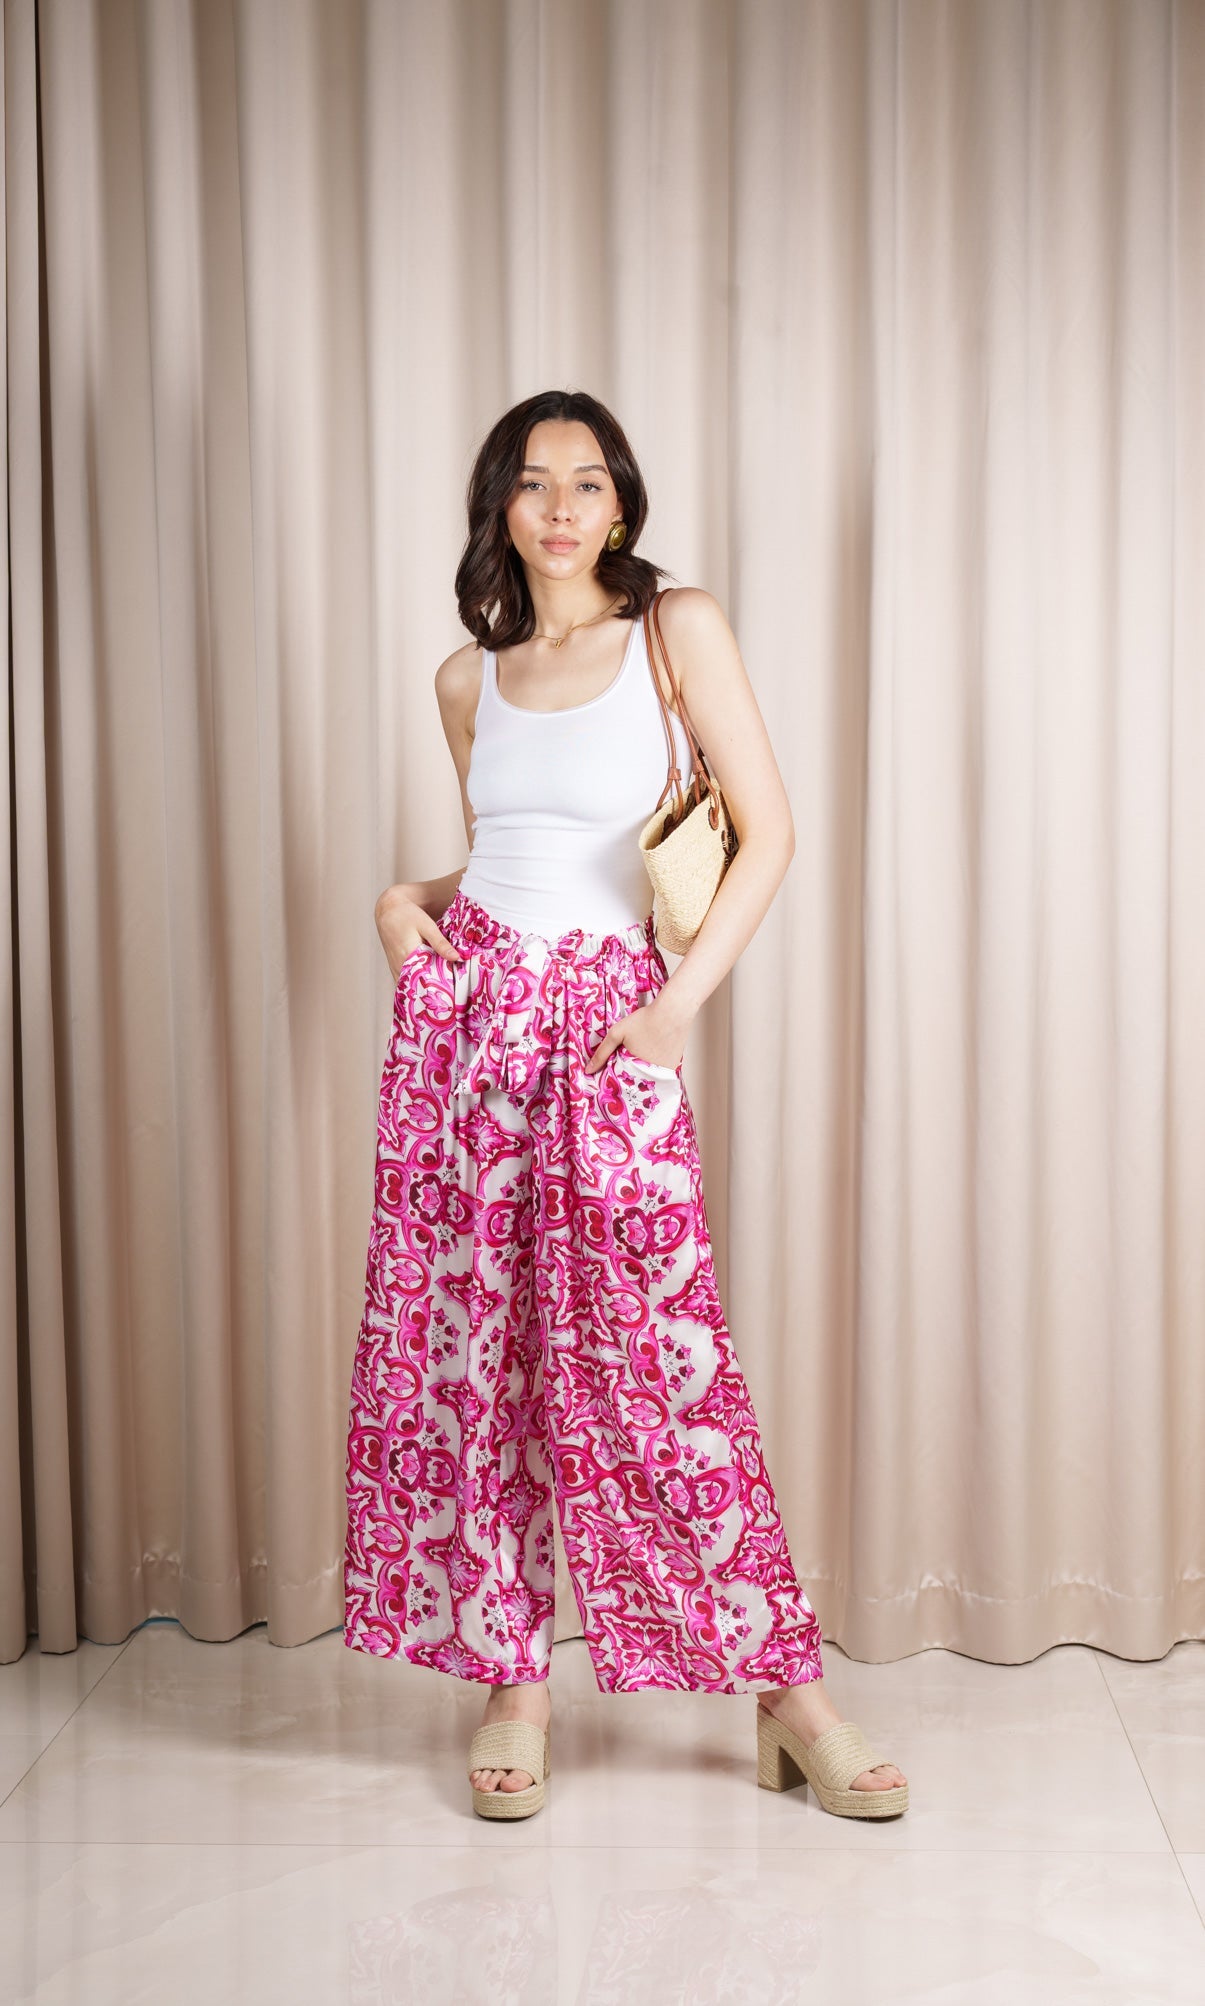 Model wears pants in a silk blend adorned with a captivating print in delicate shades of pink and white